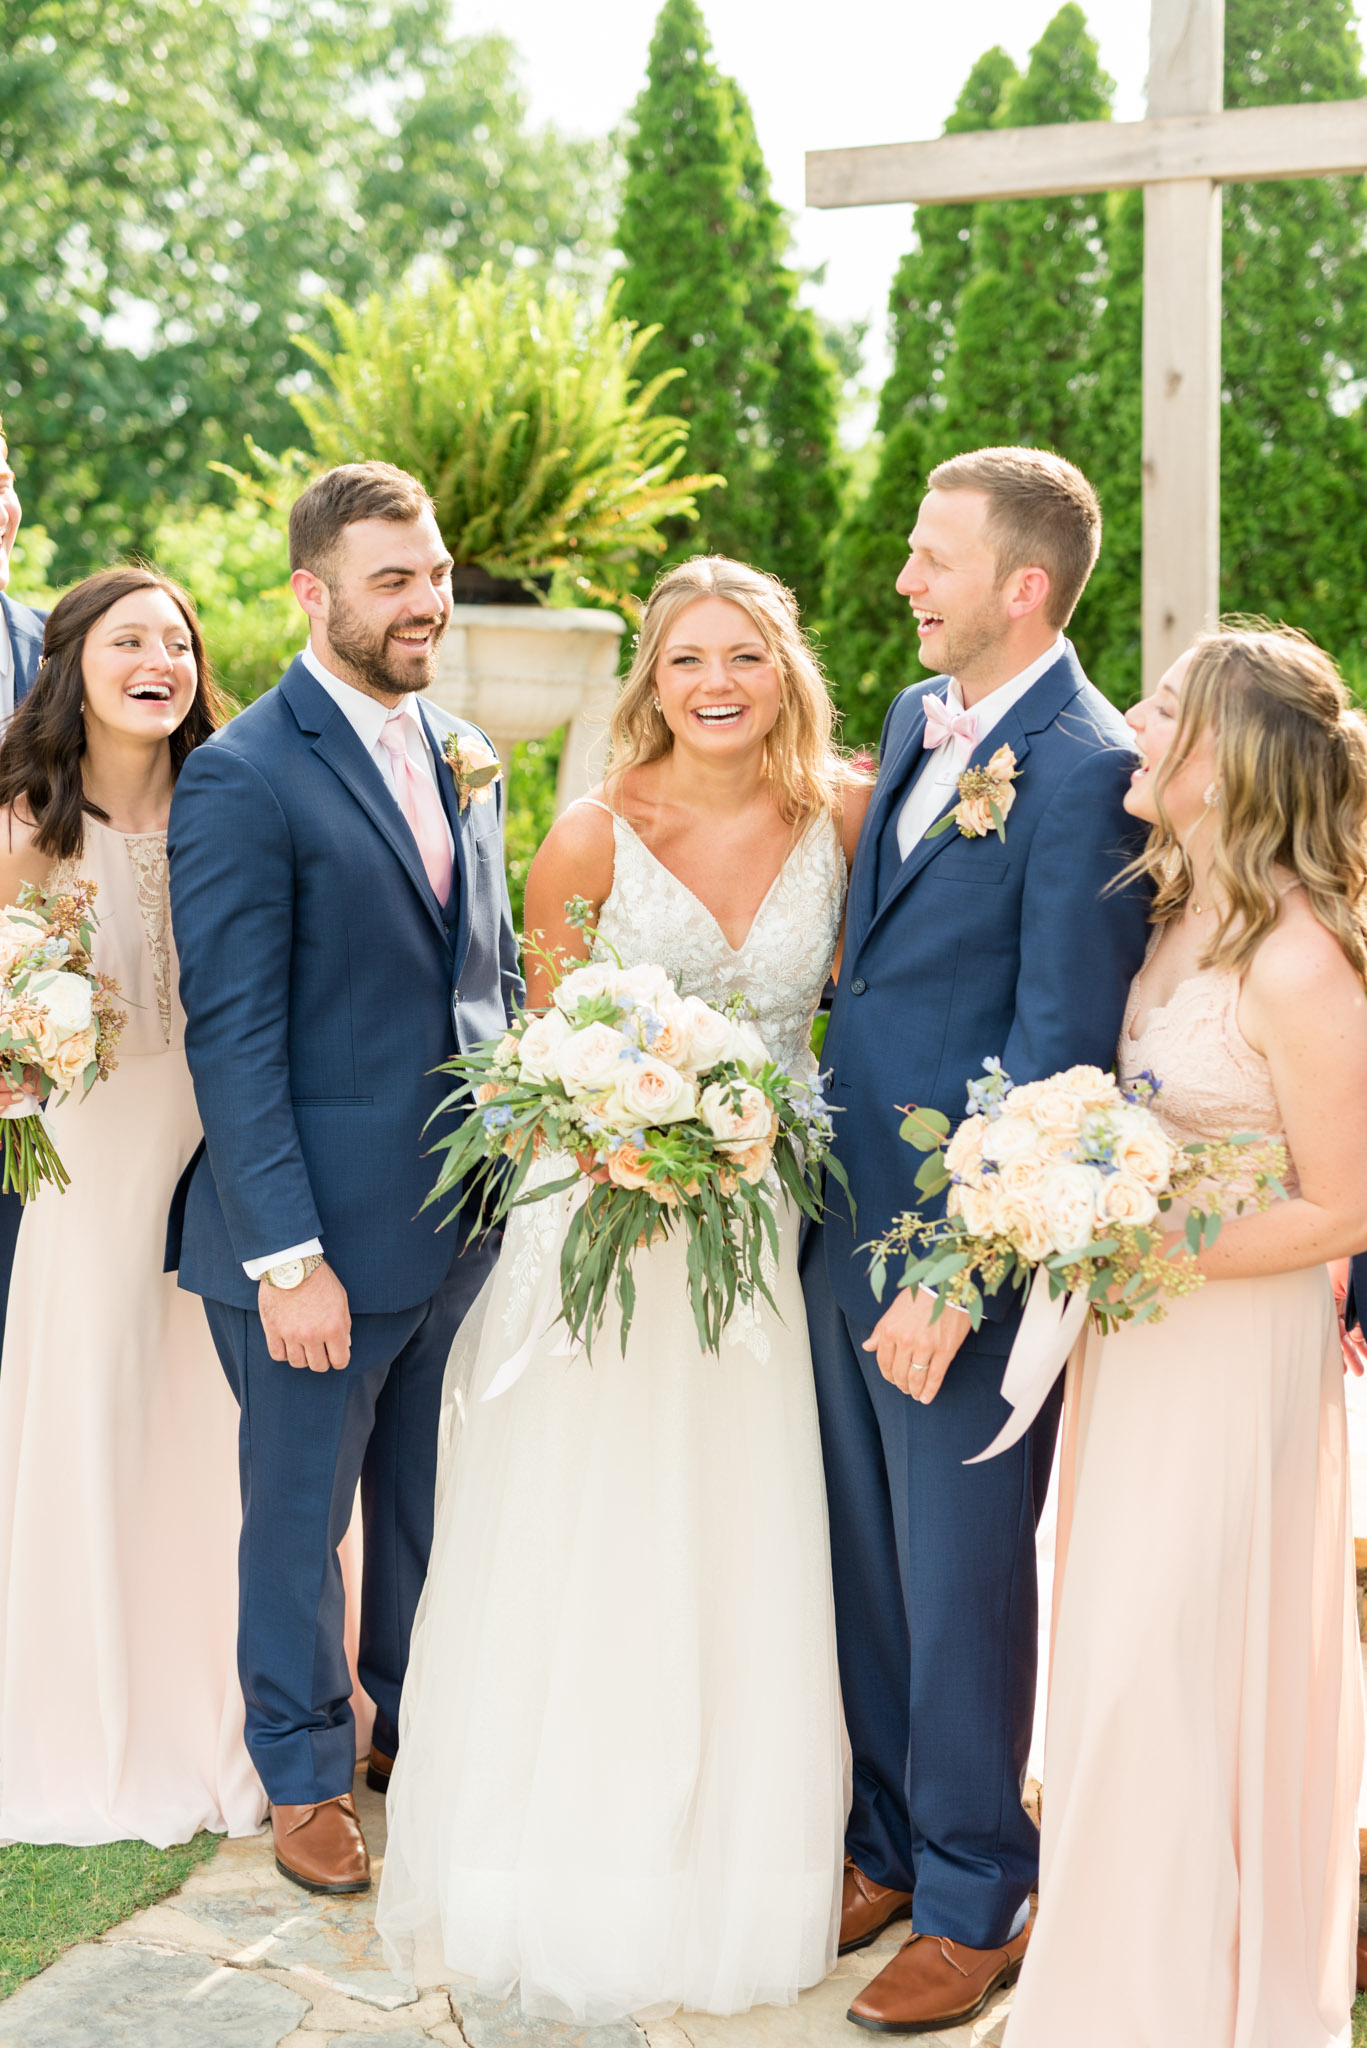 Bride laughs with wedding party.